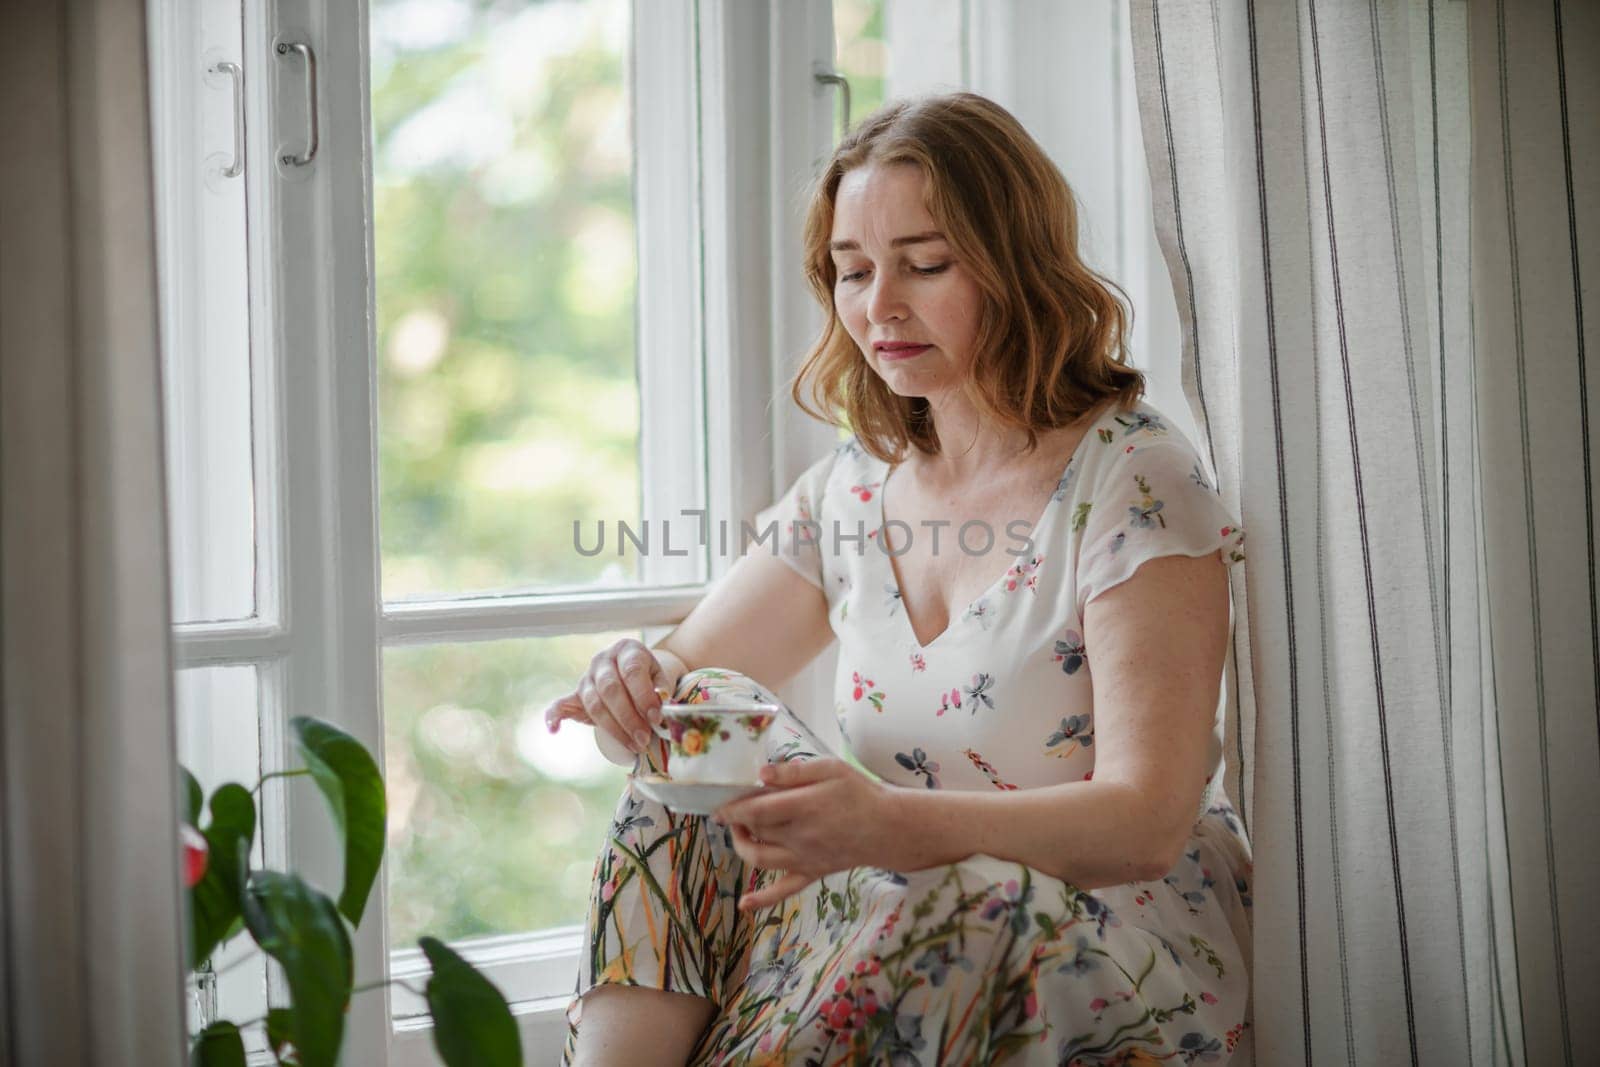 A middle-aged woman in a cream dress sits mysteriously and looks out the window on the windowsill. Green trees outside